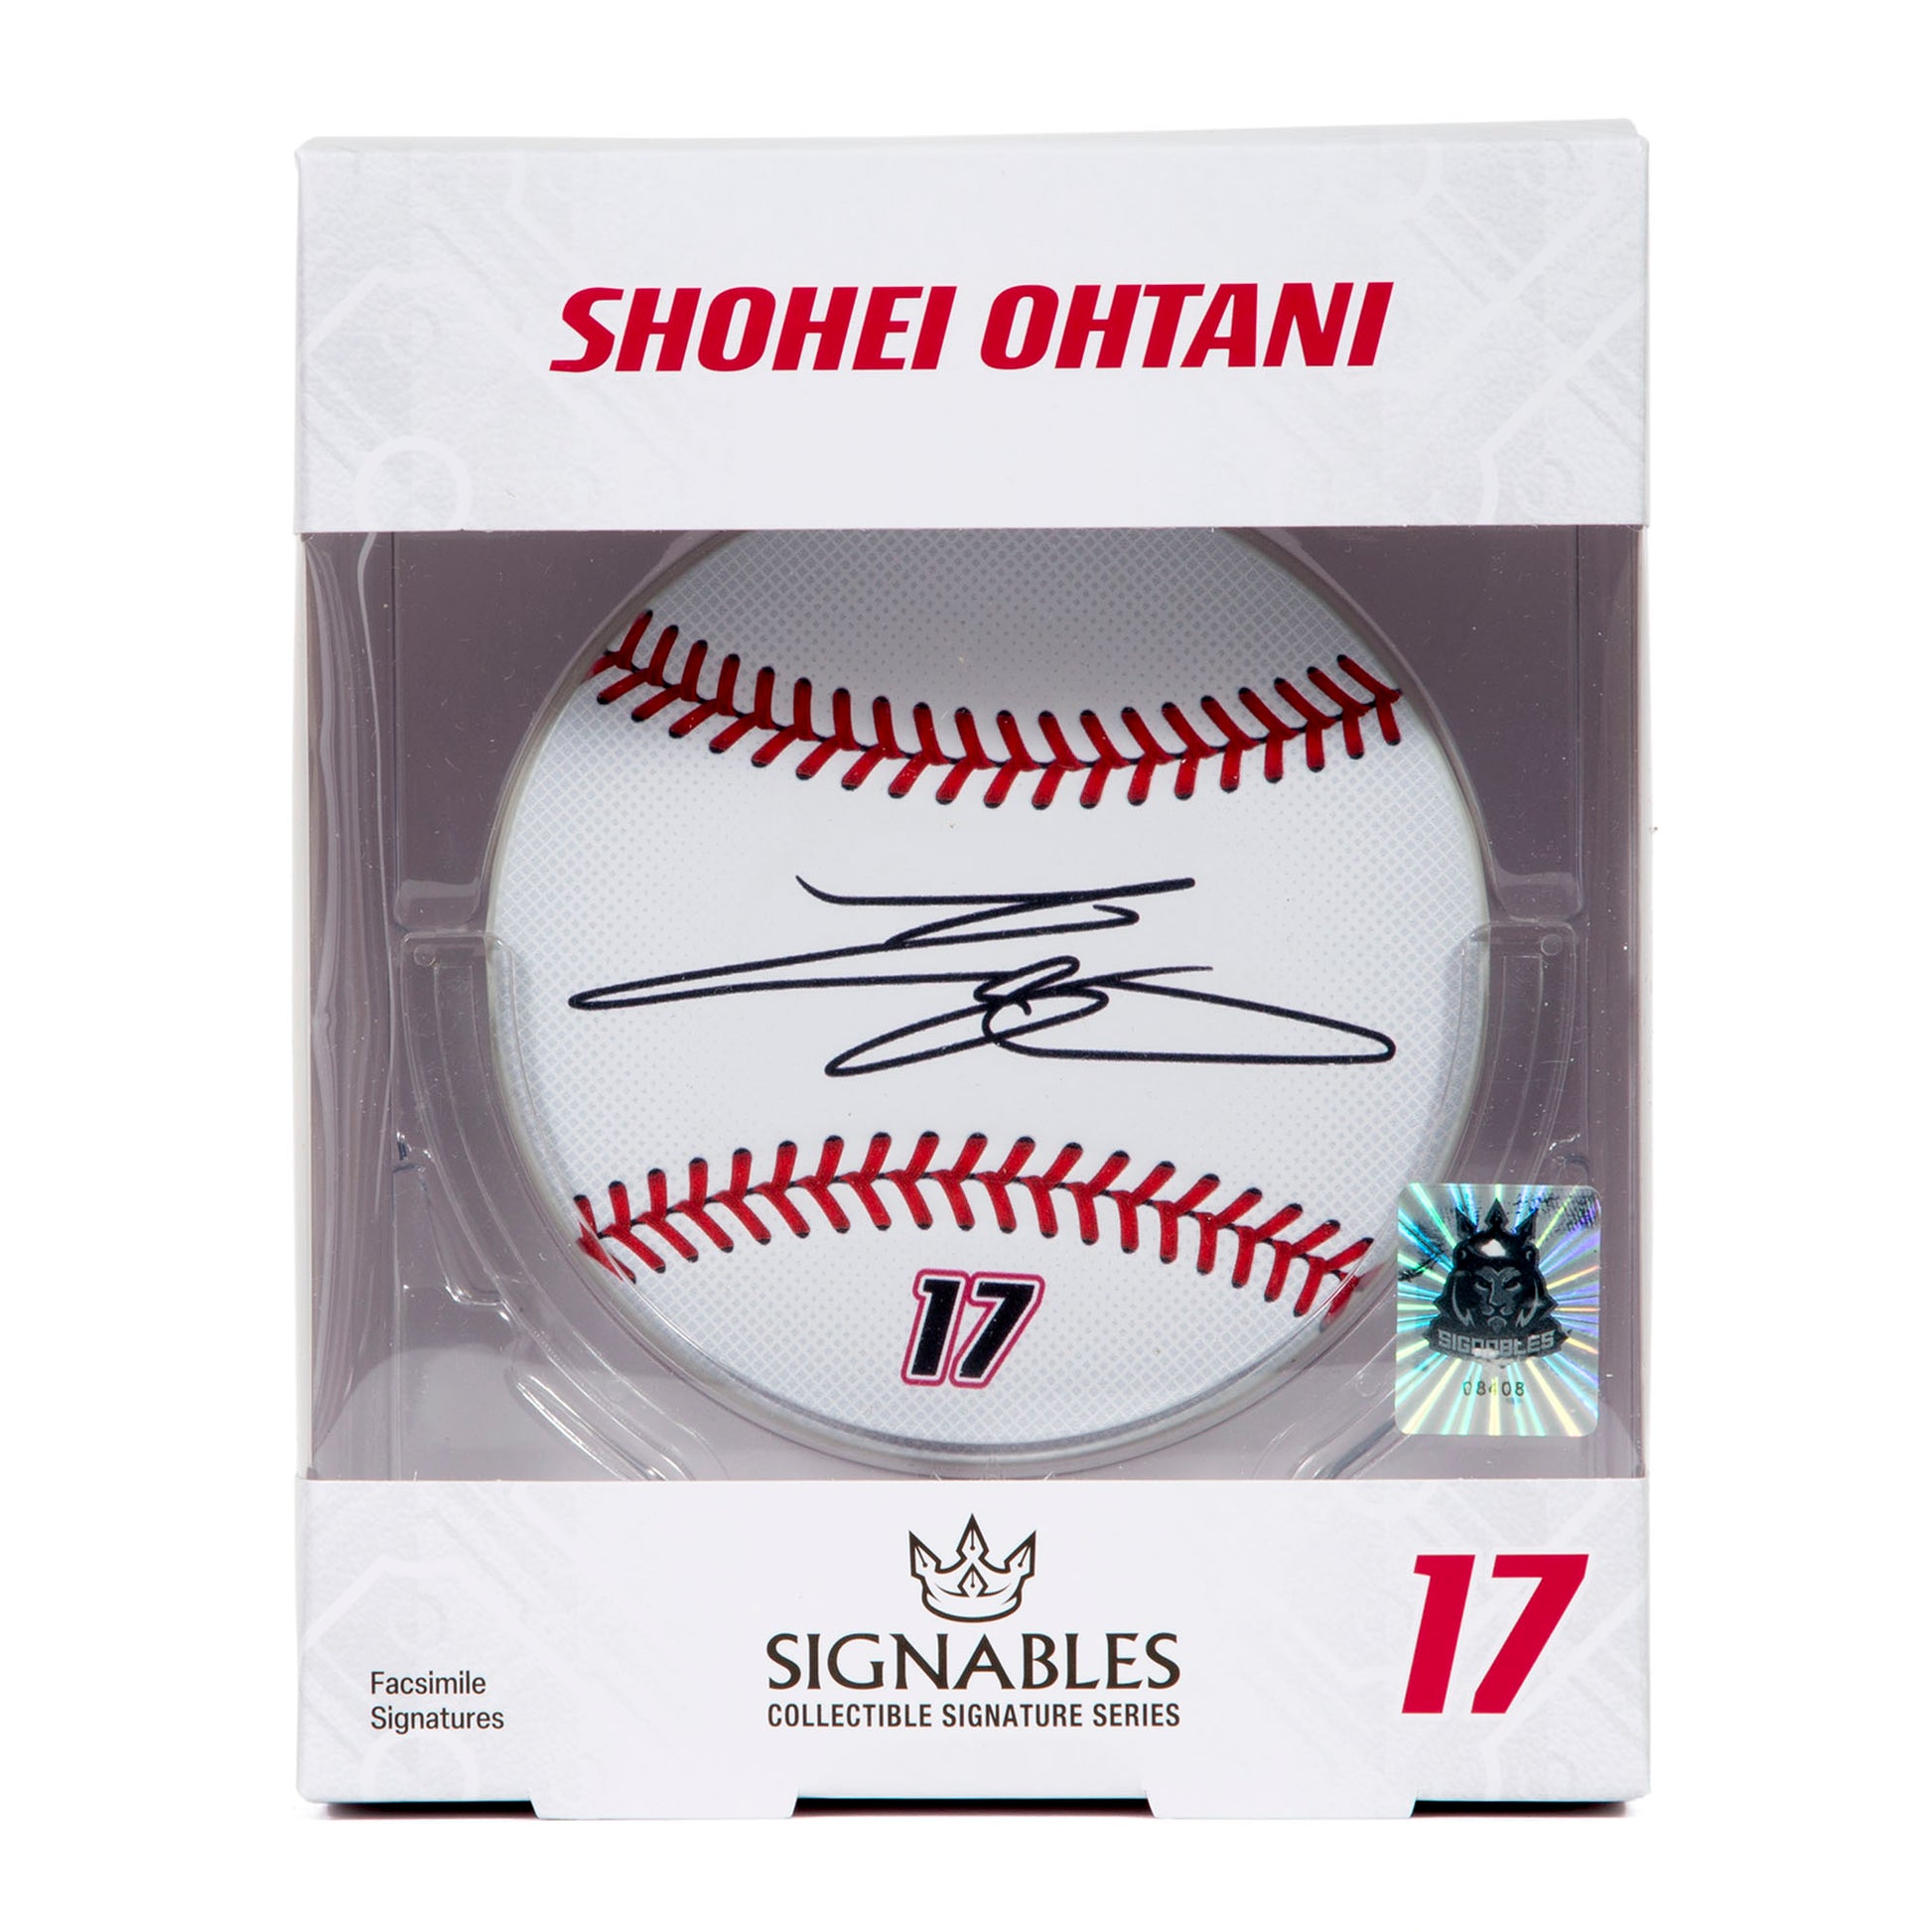 Shohei Ohtani signs with Fanatics for memorabilia and collectibles